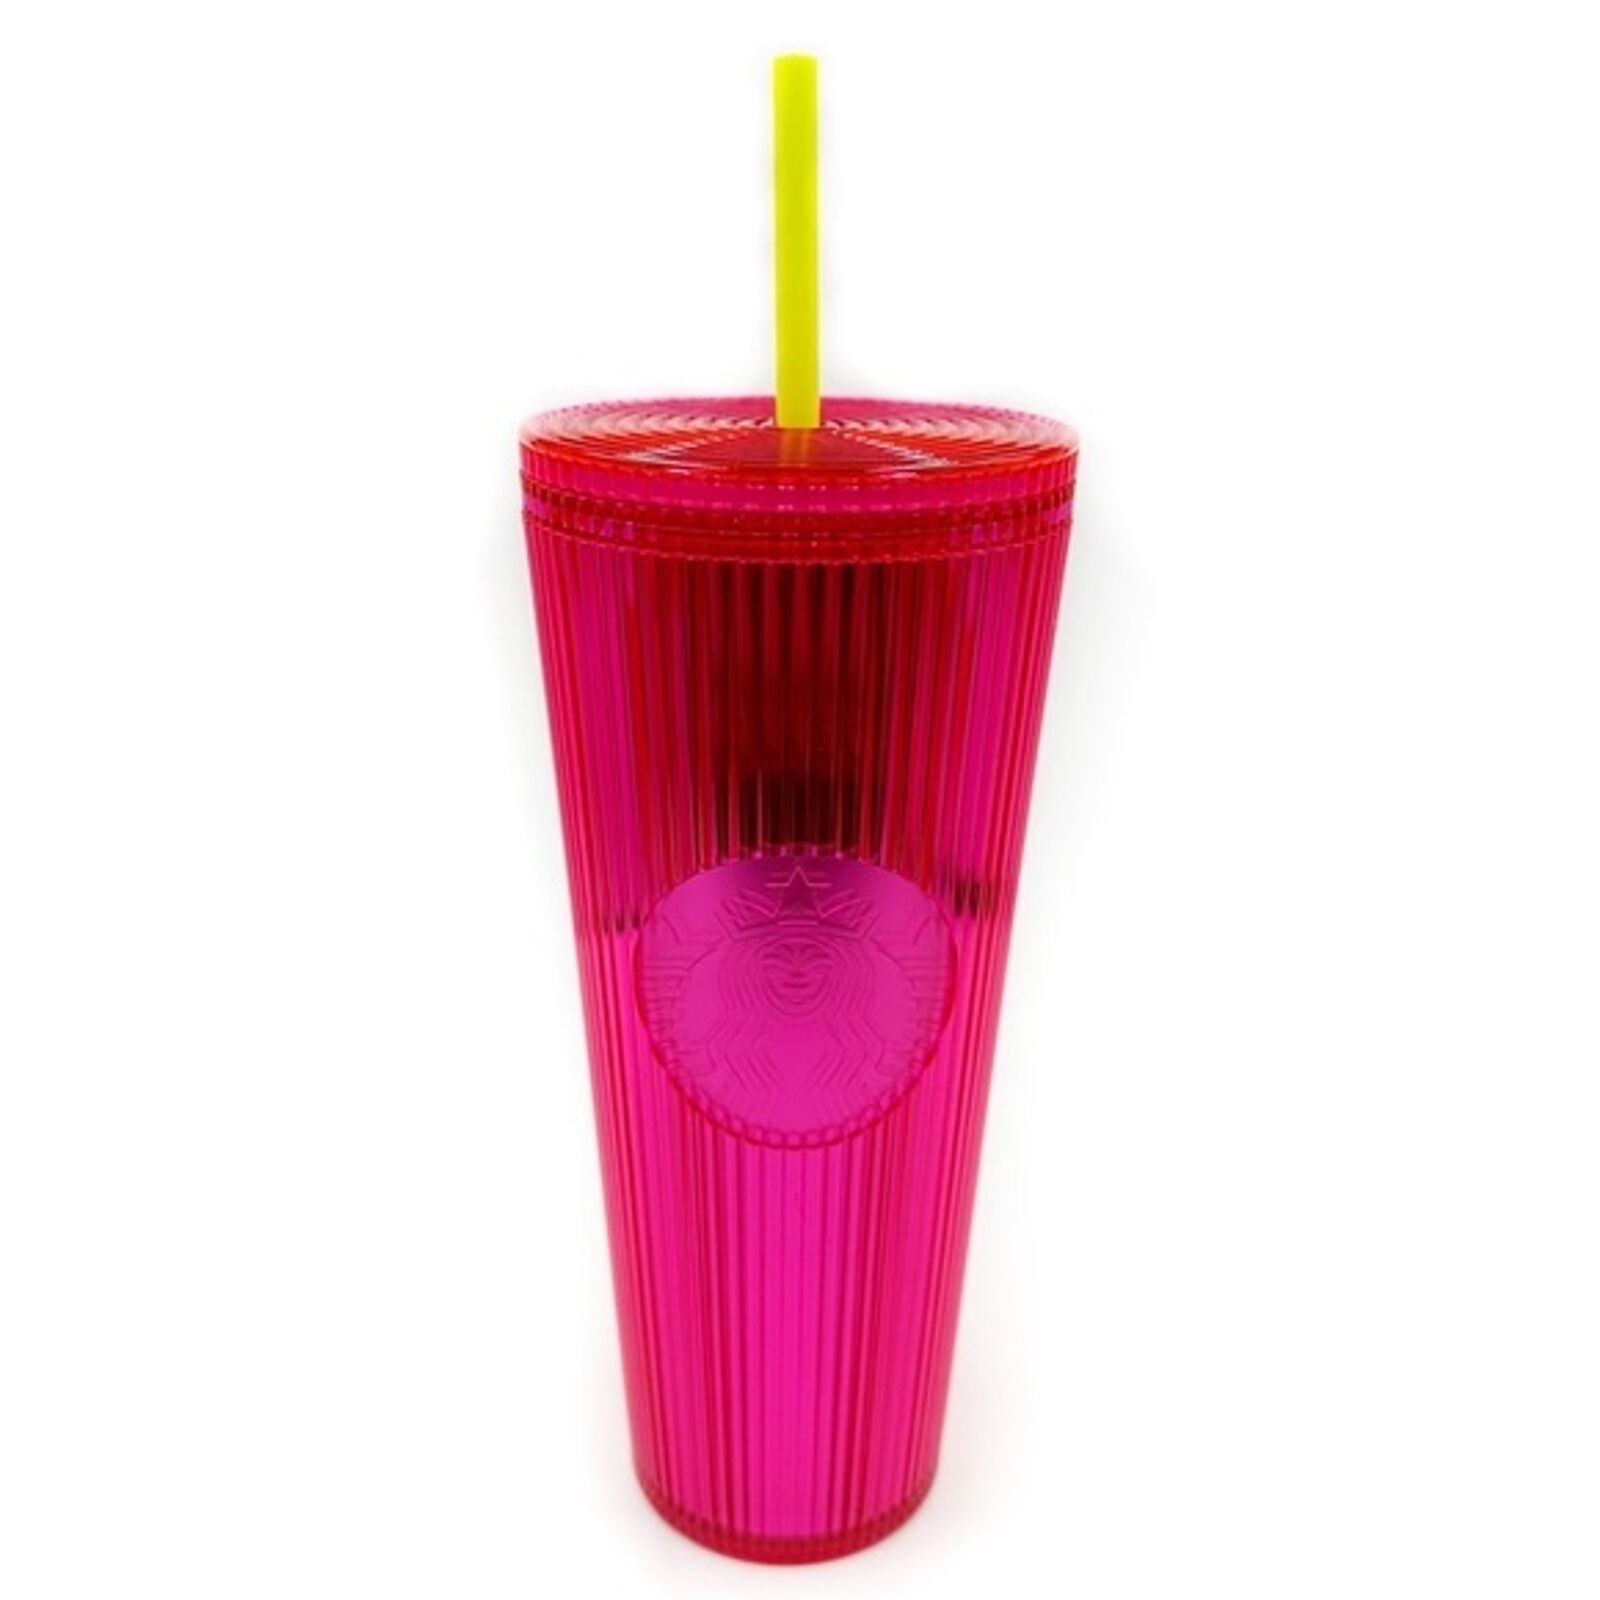 Starbucks Neon Hot Pink Tumbler Textured Travel Cup With Straw Venti 24 fl oz